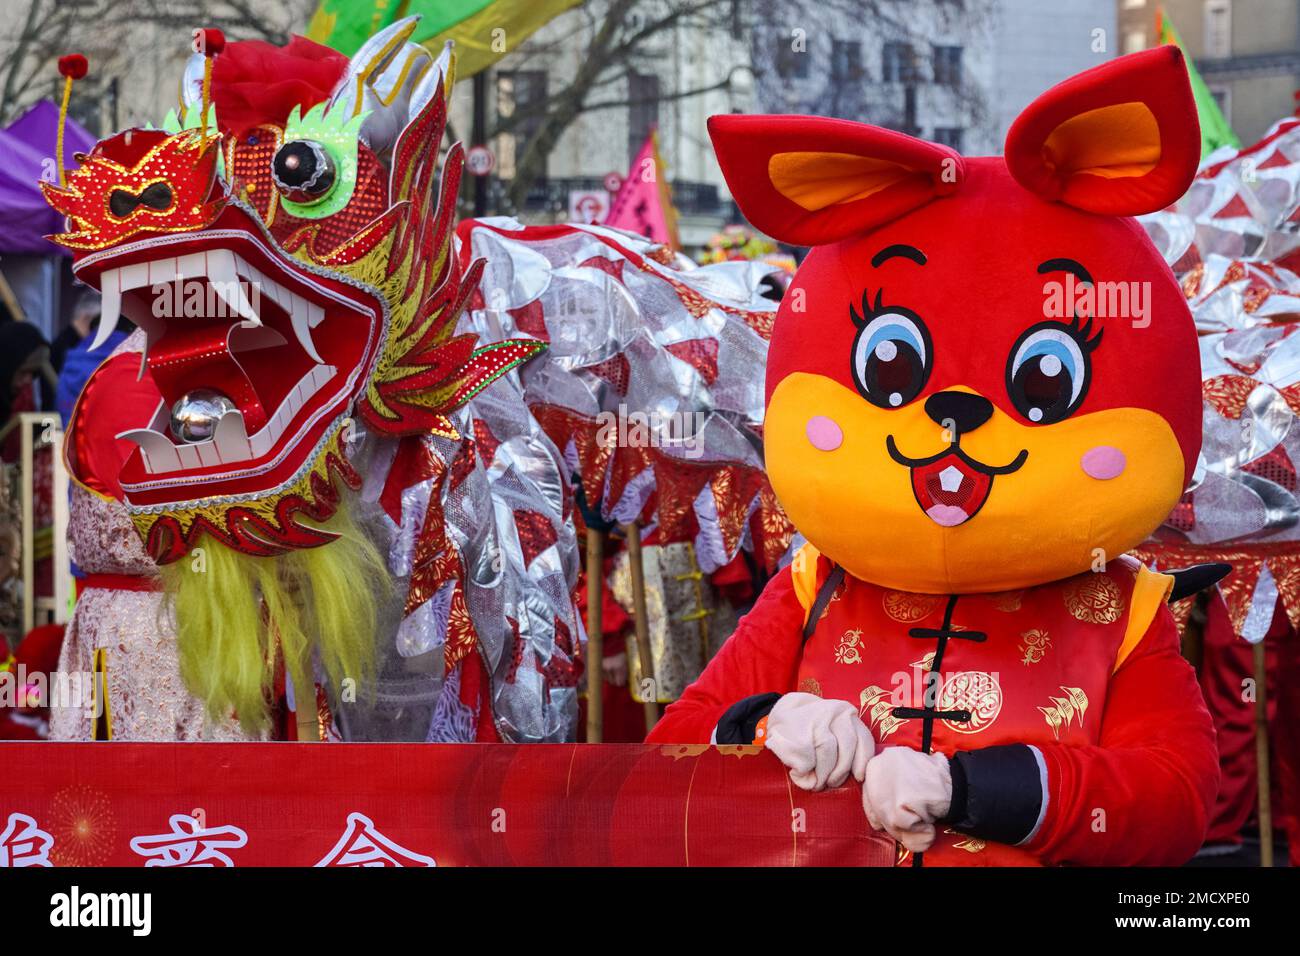 London, UK. 22nd Jan, 2023. Performers taking part in traditional Chinese New Year parade in London Chinatown celebrating Lunar New Year 2023, Year of the Rabbit. Credit: Marcin Rogozinski/Alamy Live News Stock Photo